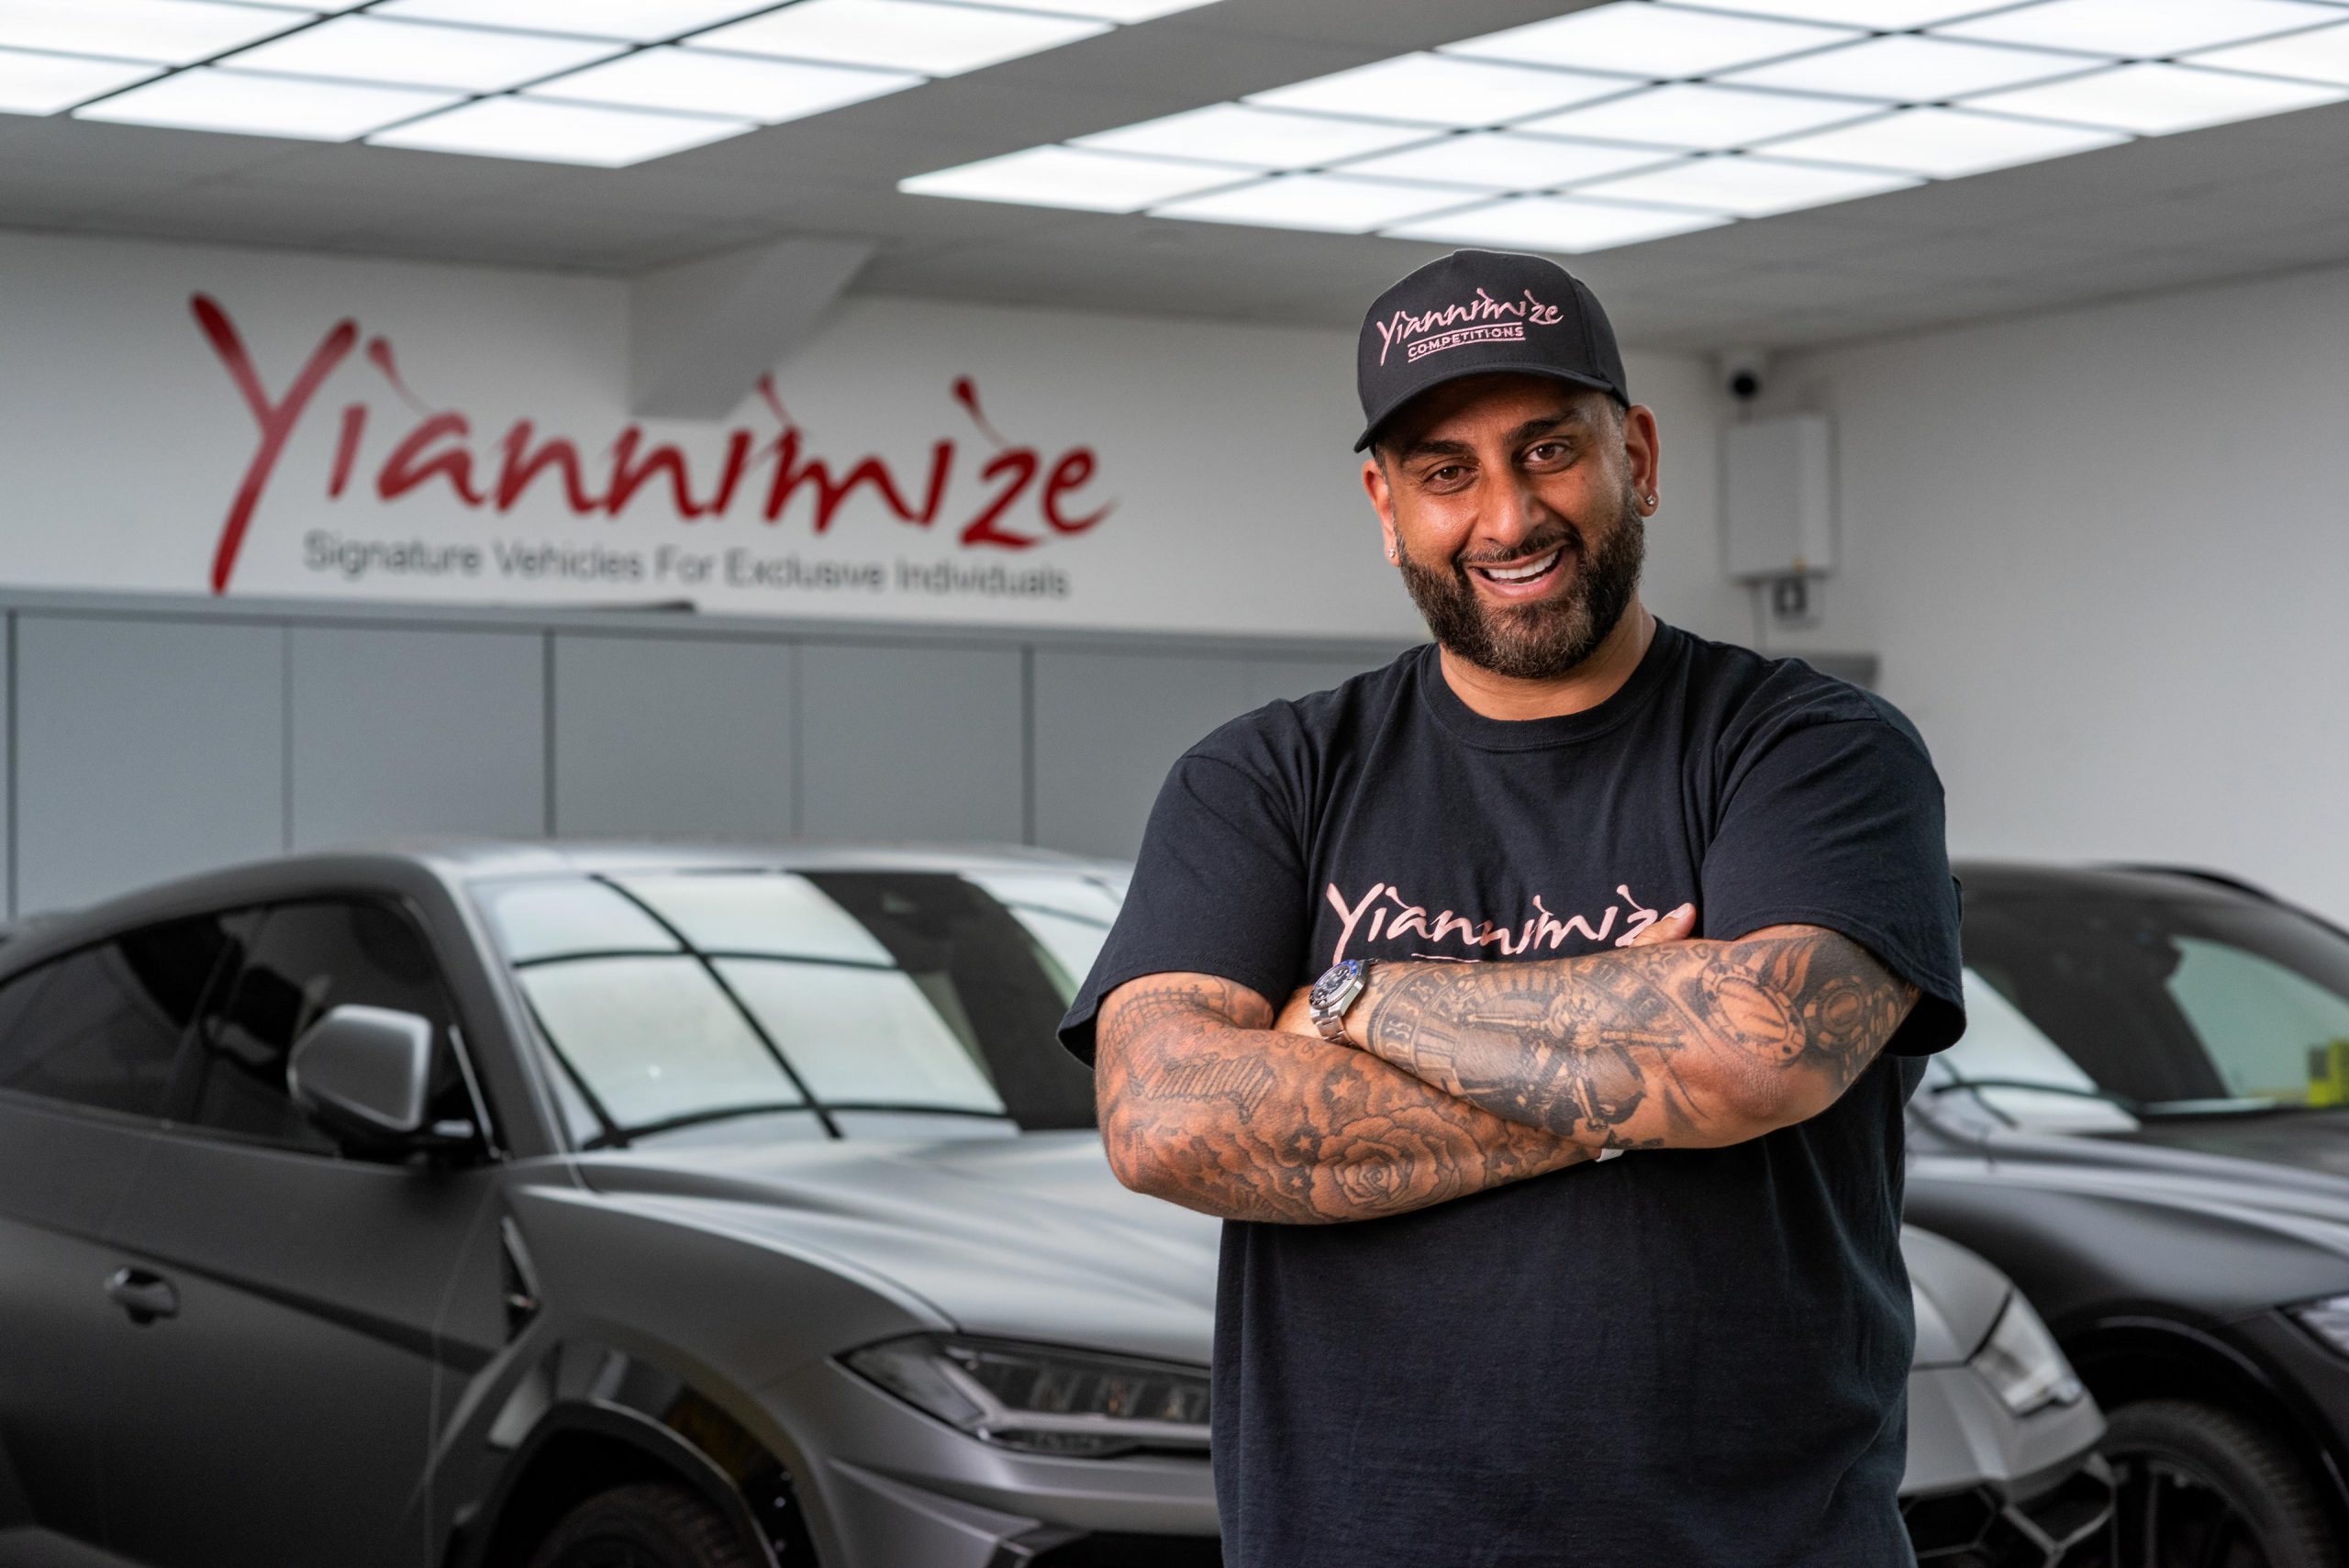 Image of social media personality Yiannimize, known for wrapping exotic cars, standing in his garage with Lamborghinis in the background. His branding is prominently displayed on the wall.